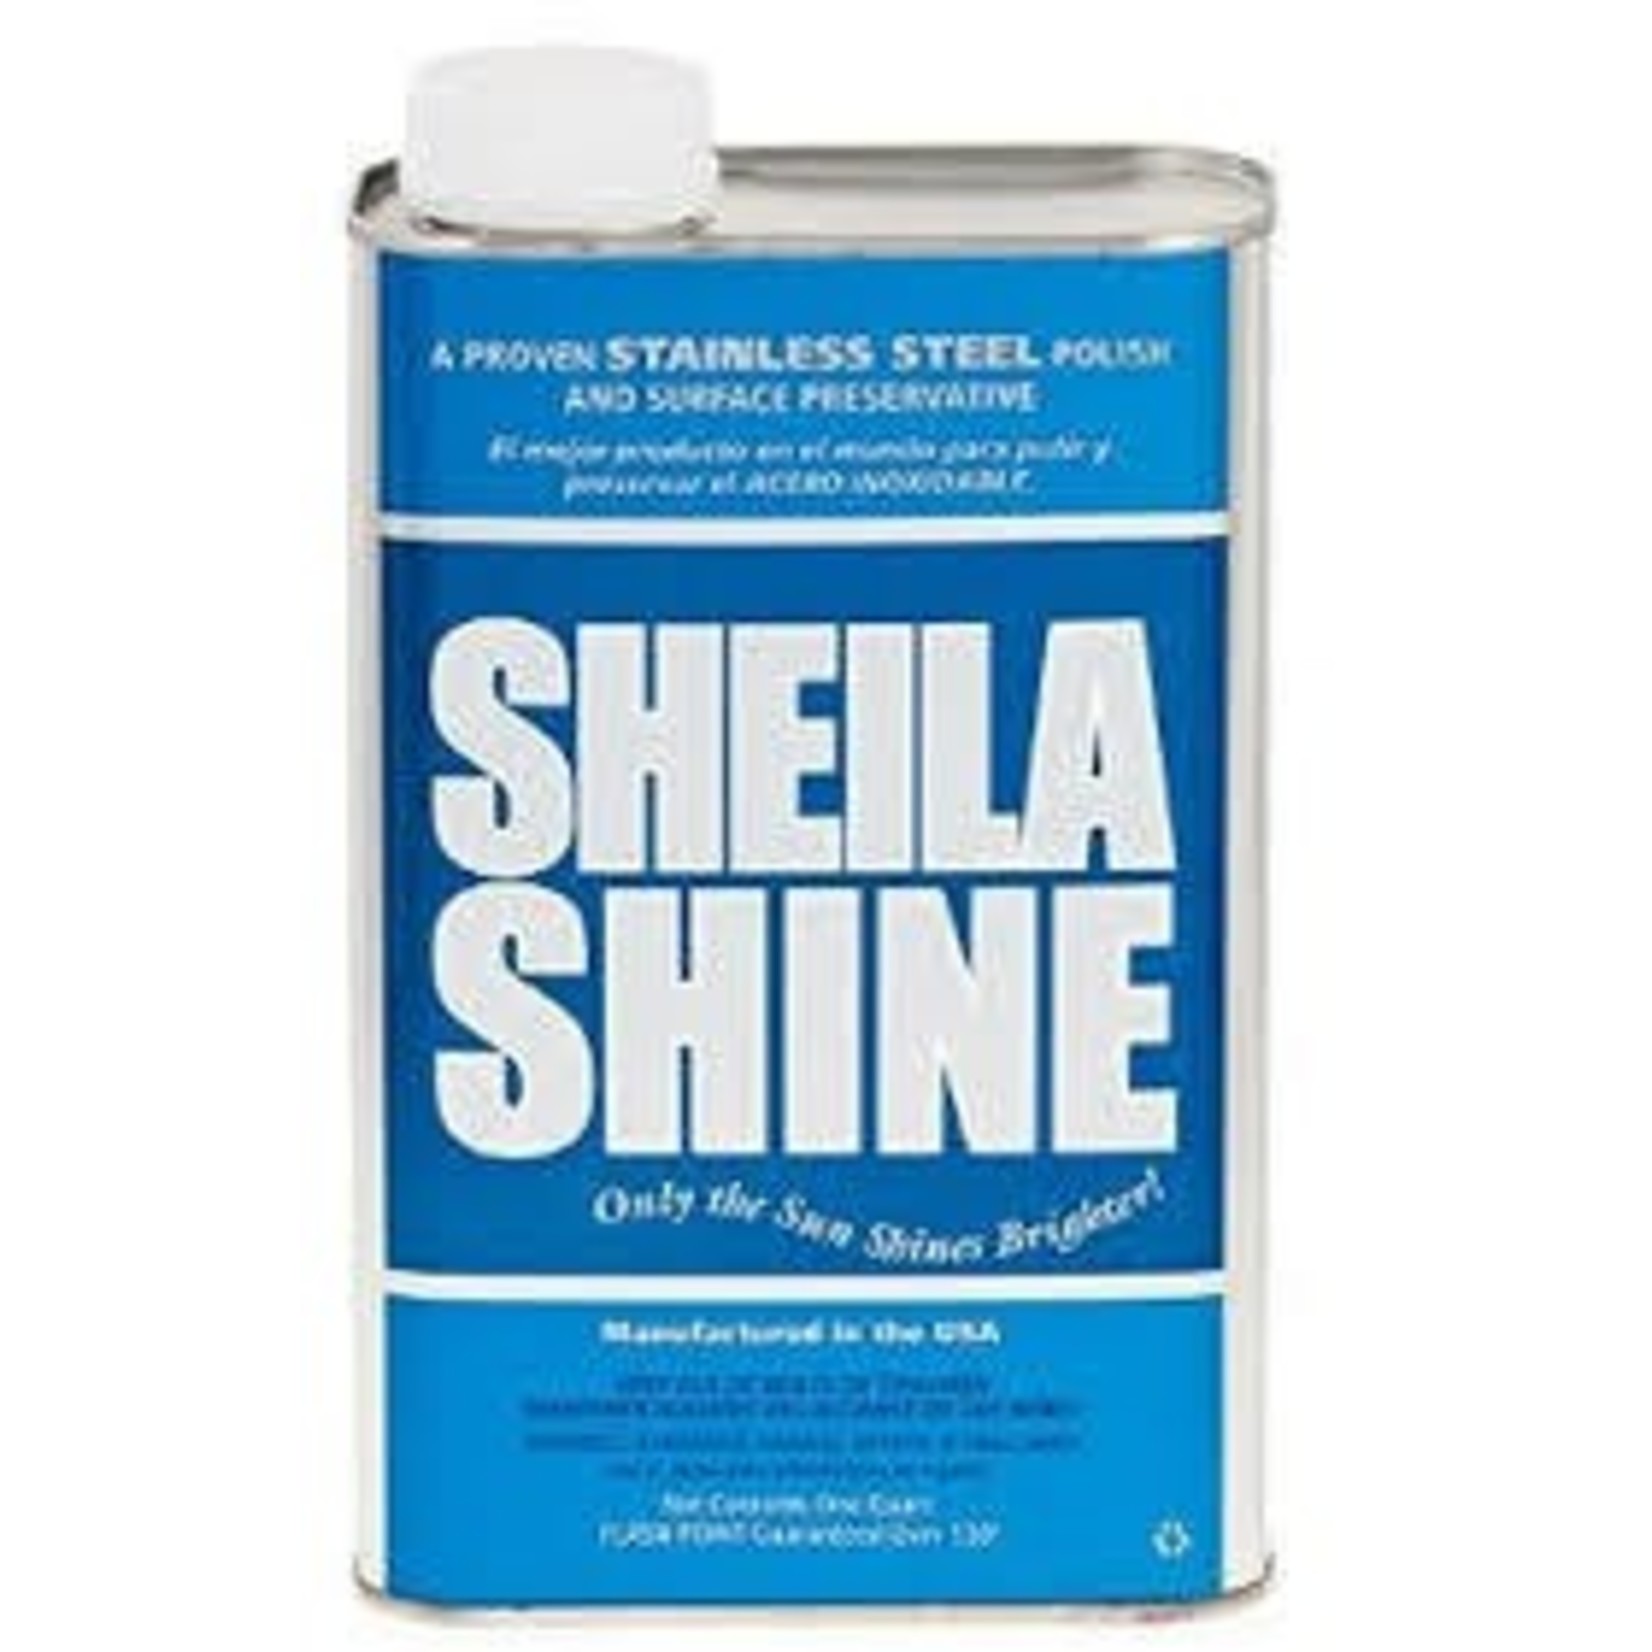 Sheila Shine, Stainless Steel Polish and Preservative